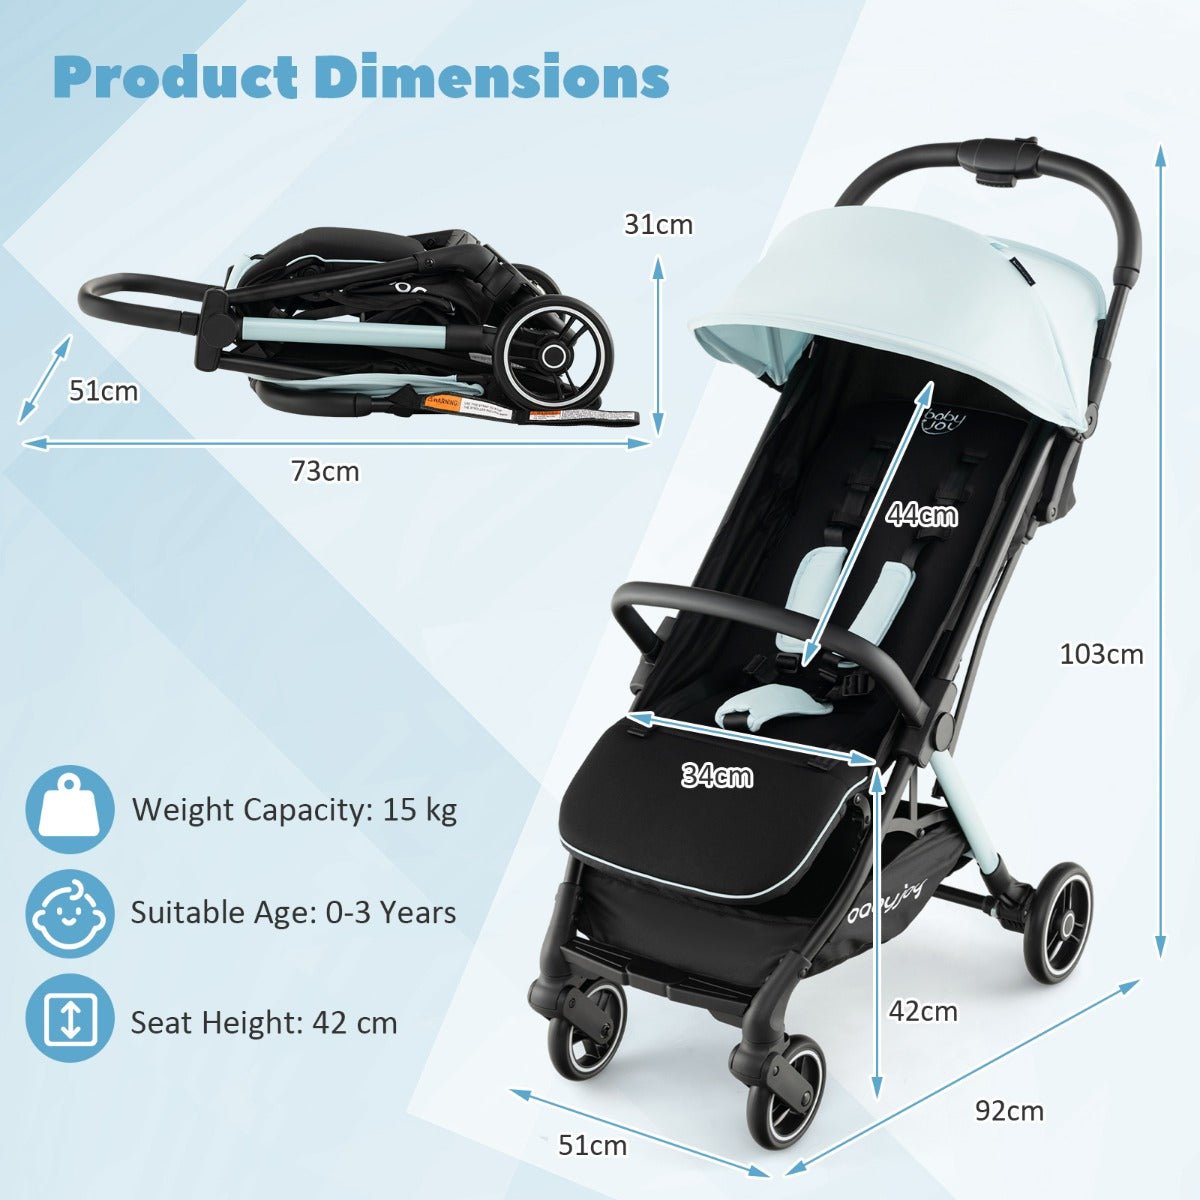 Explore with Ease: Blue Gravity Fold Stroller